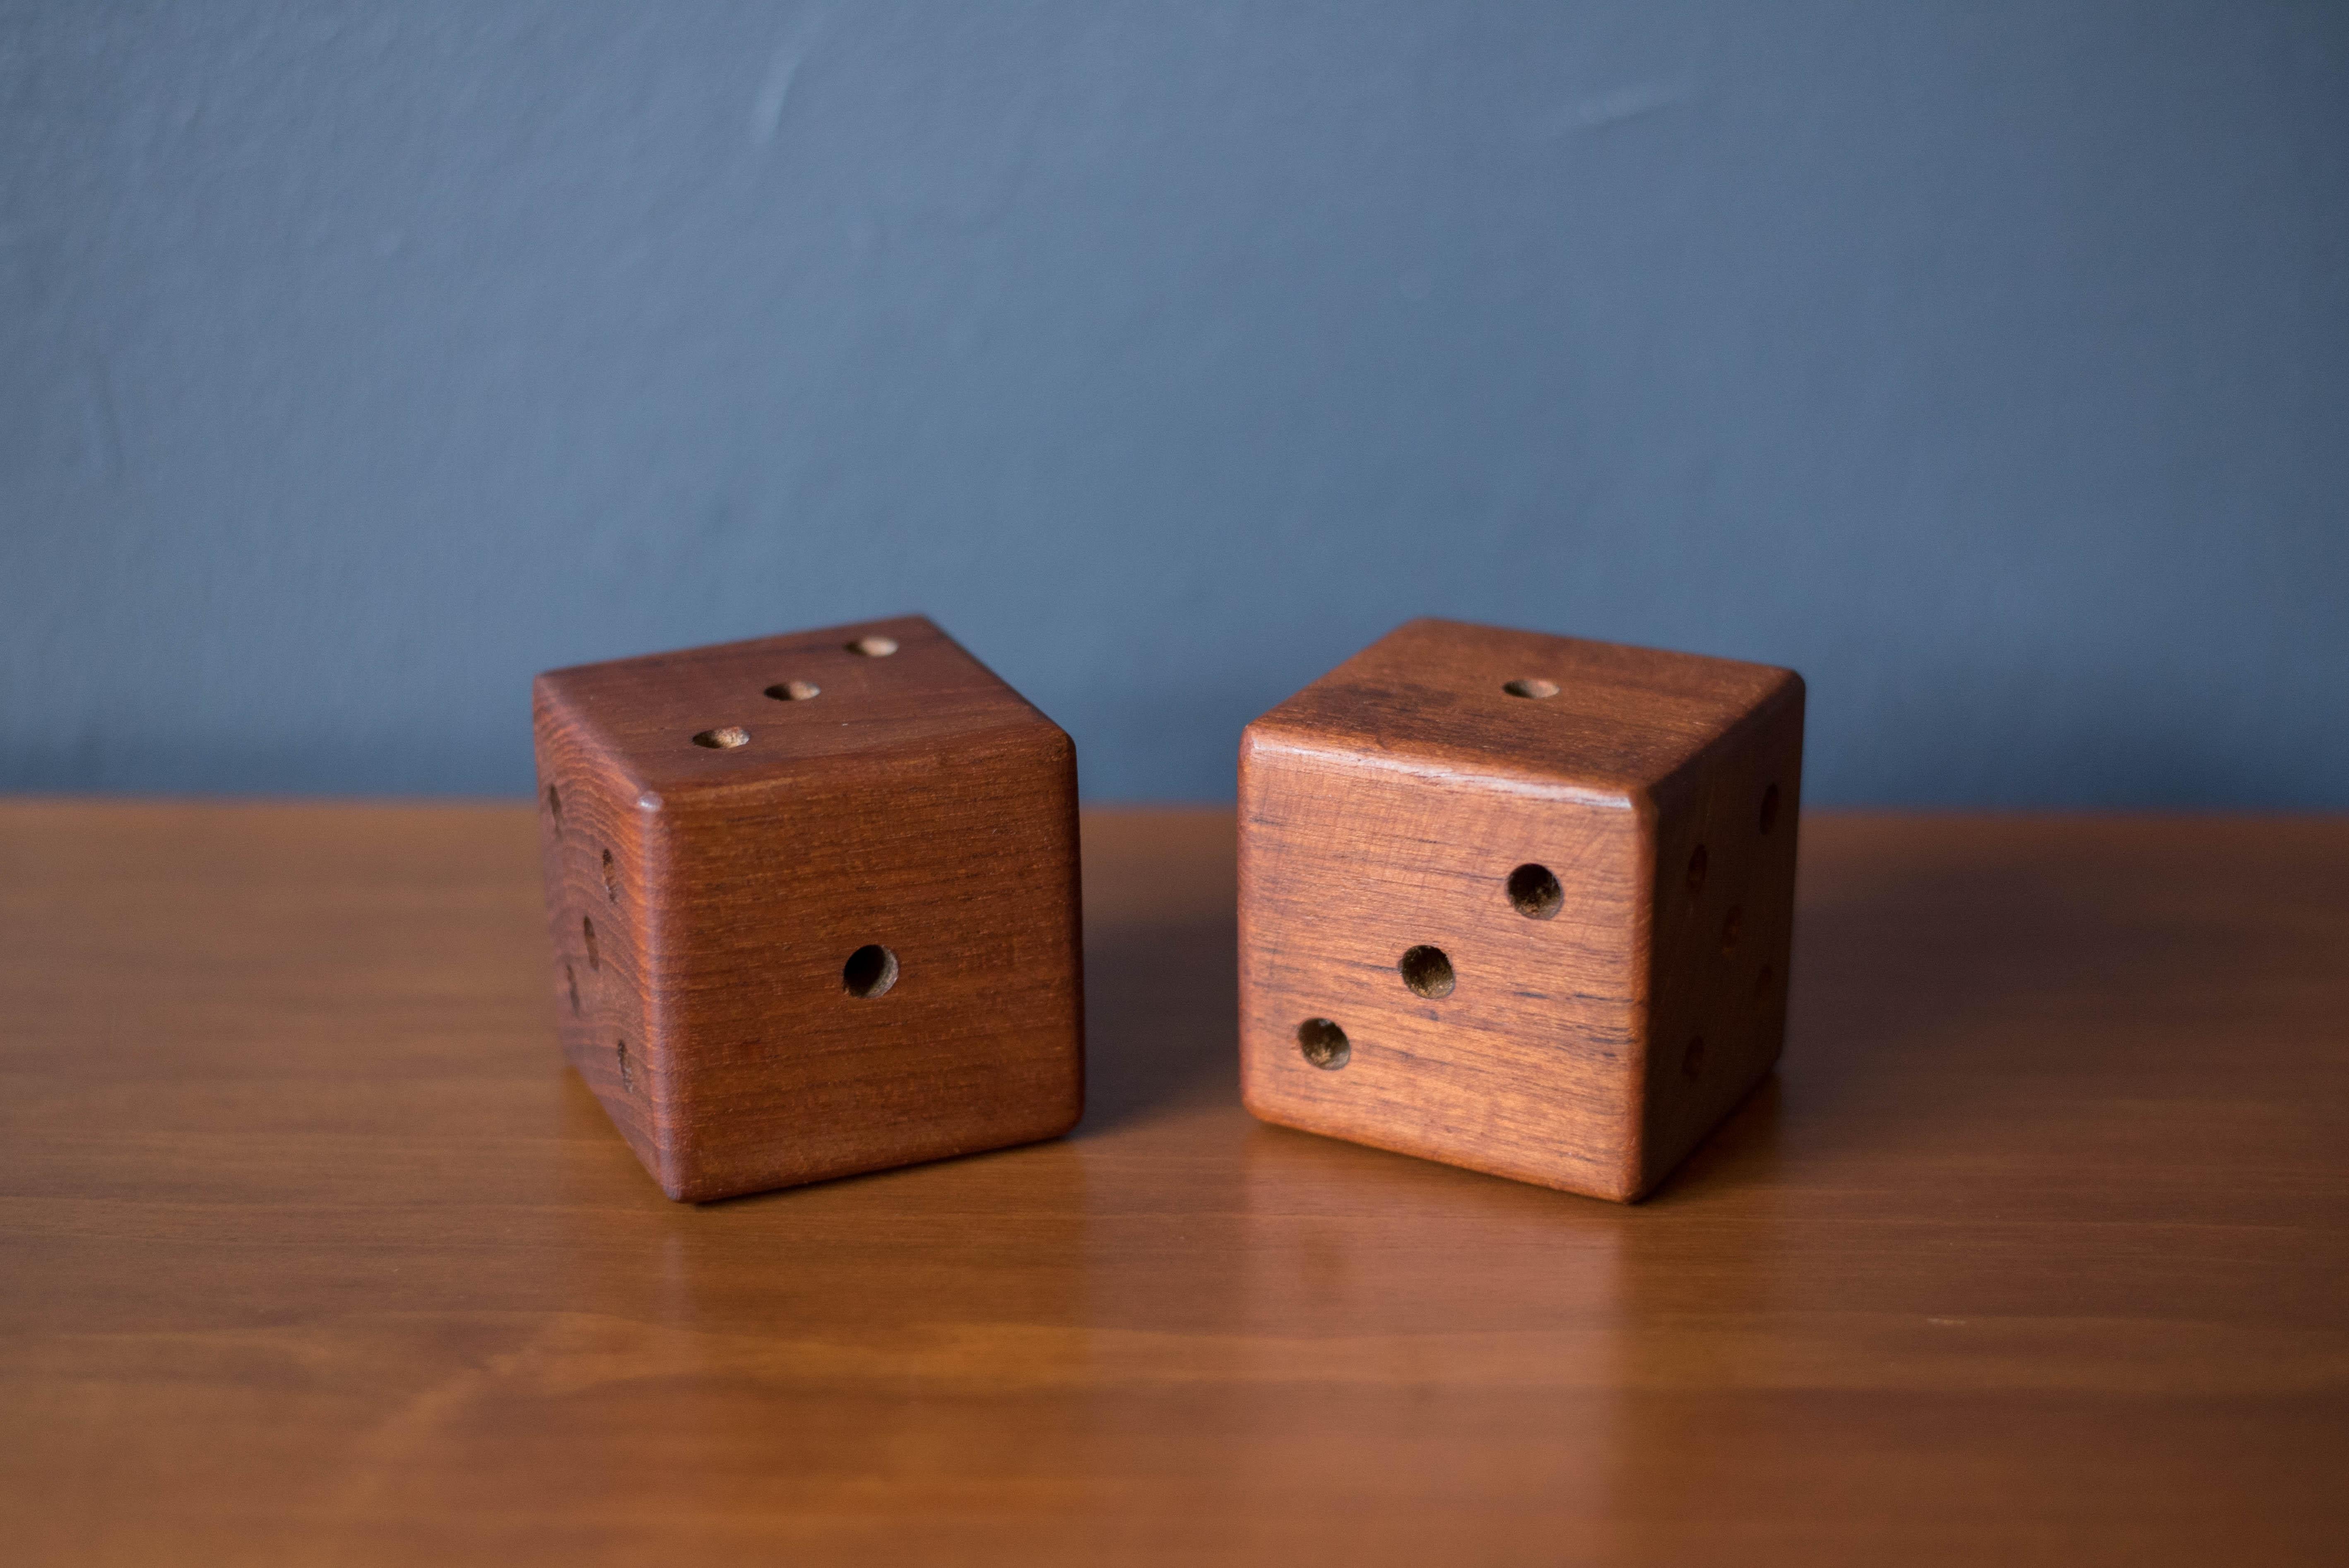 Vintage set of oversized wood dice, circa 1960s. This fun and unique pair is handcrafted in old growth teak and can be accessorized with any modern decor.


Offered by Mid Century Maddist